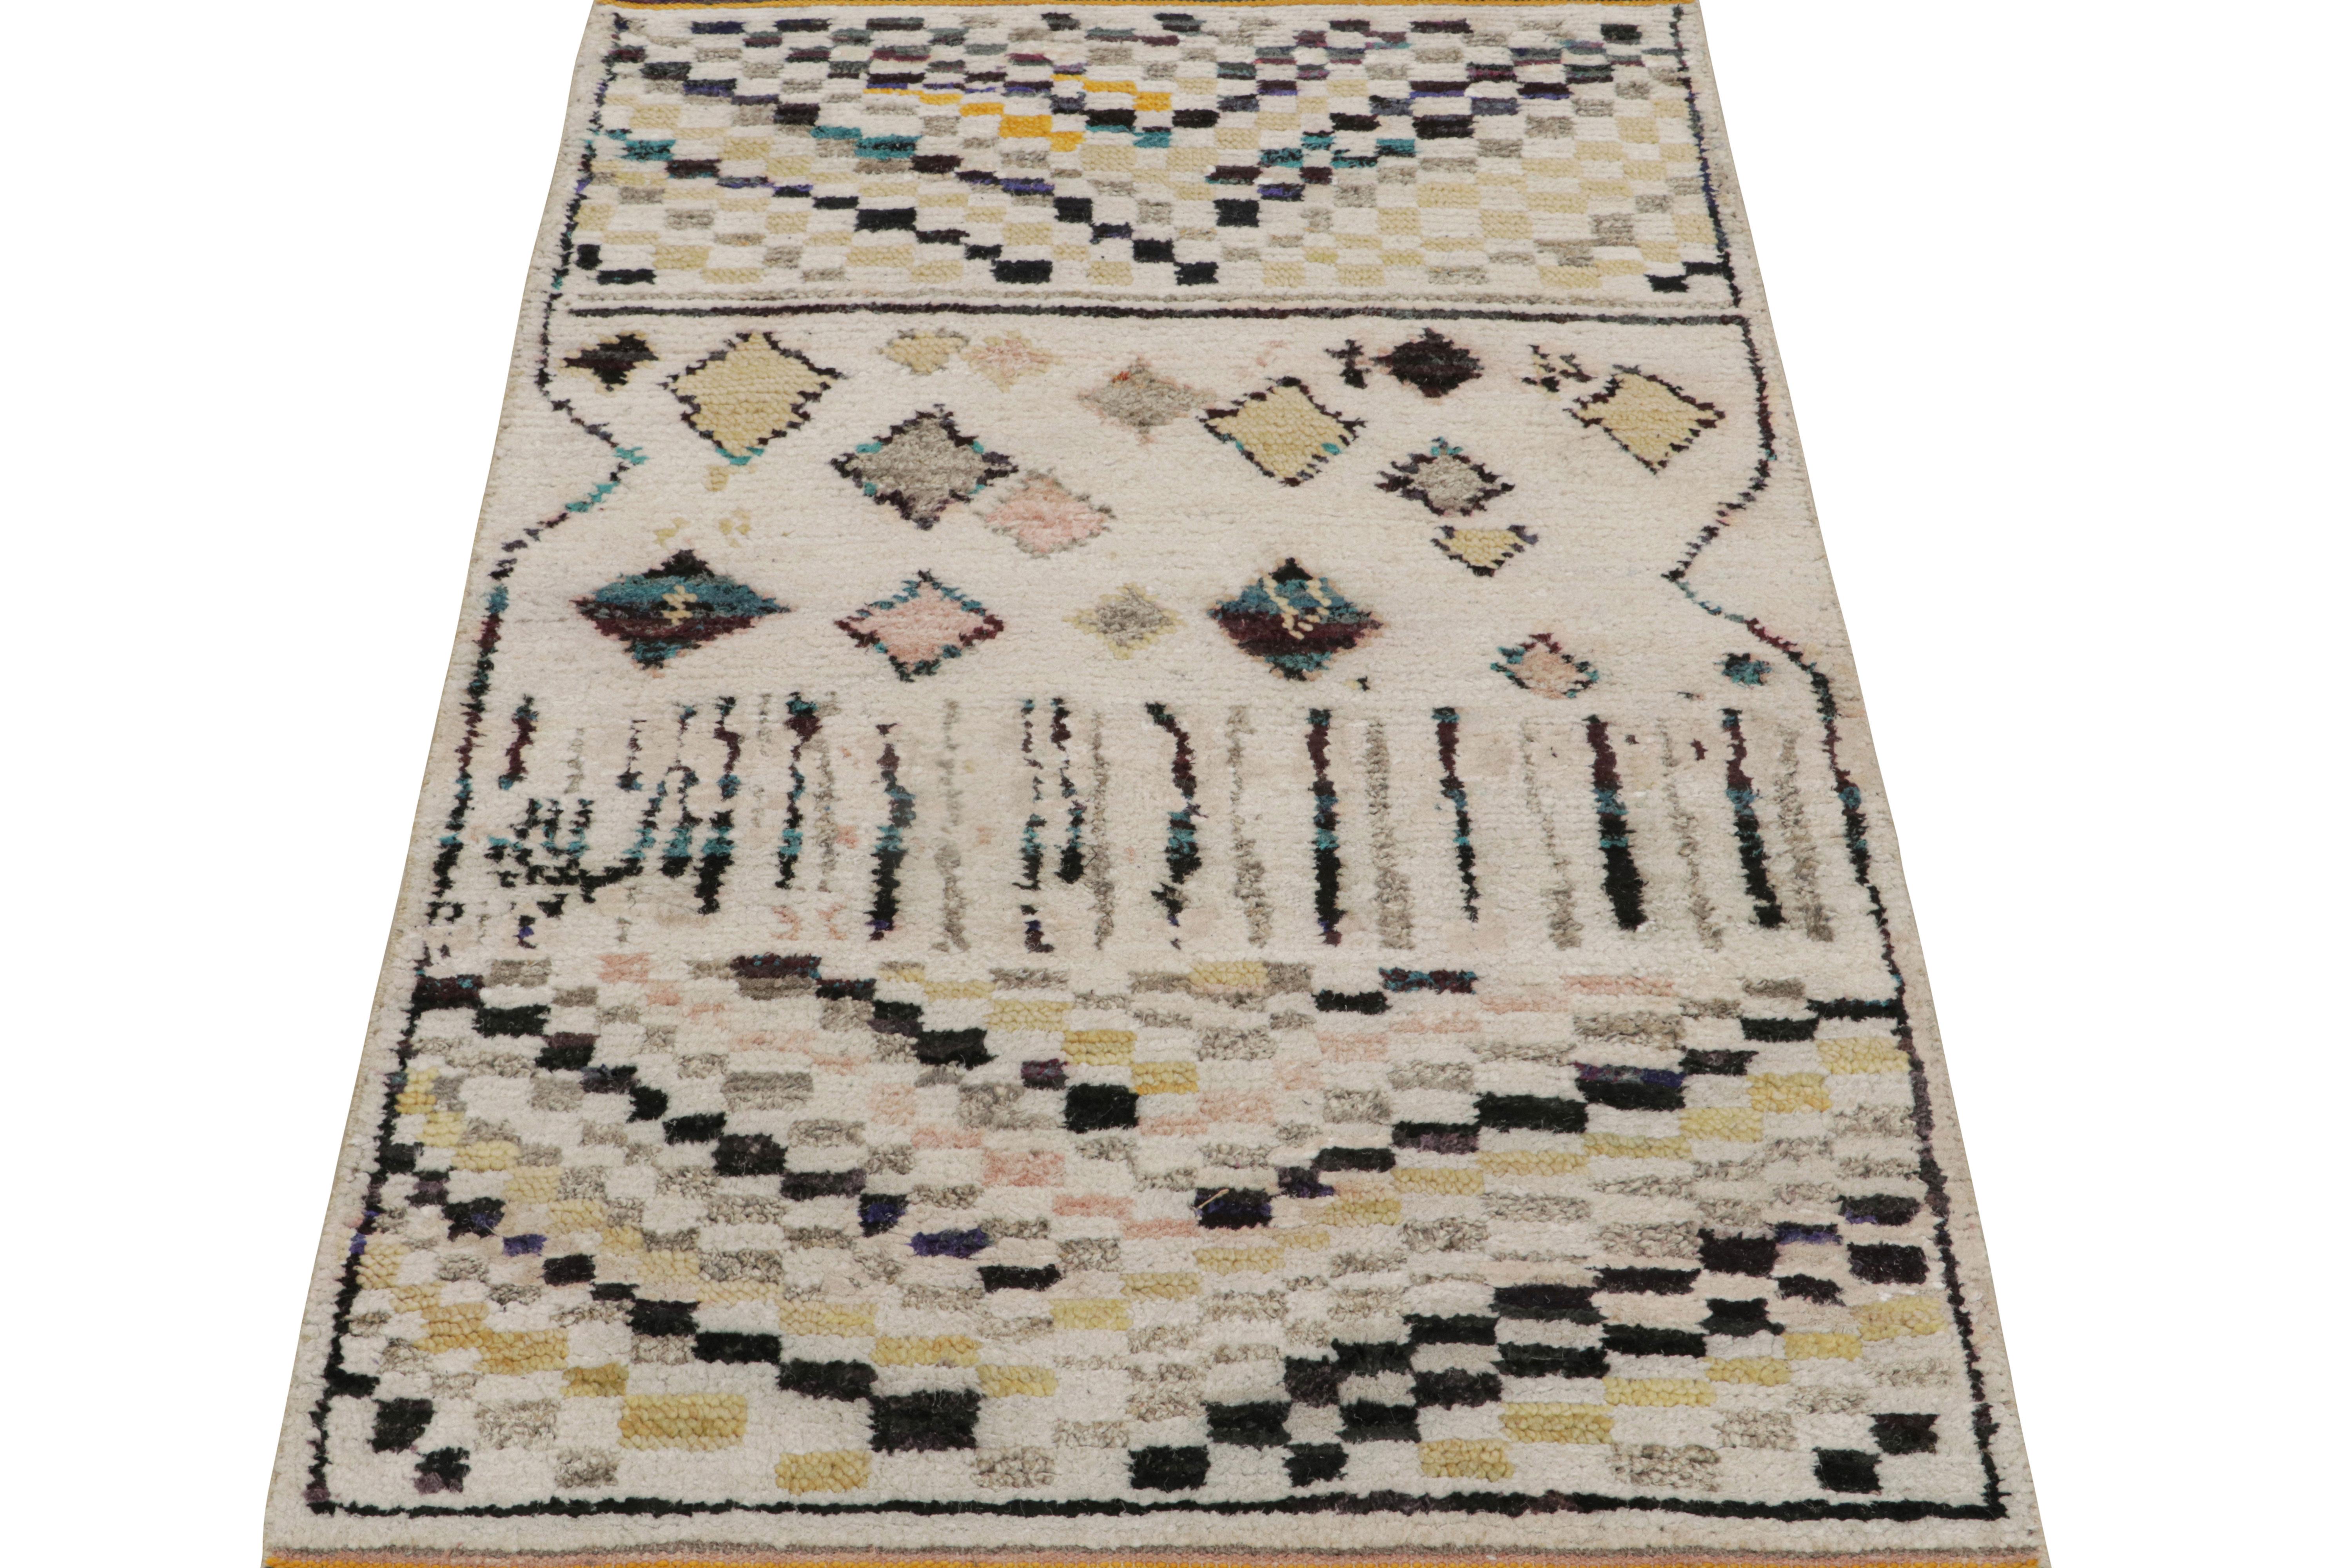 Tribal Rug & Kilim’s Contemporary Moroccan Style Rug with Berber Geometric Patterns For Sale